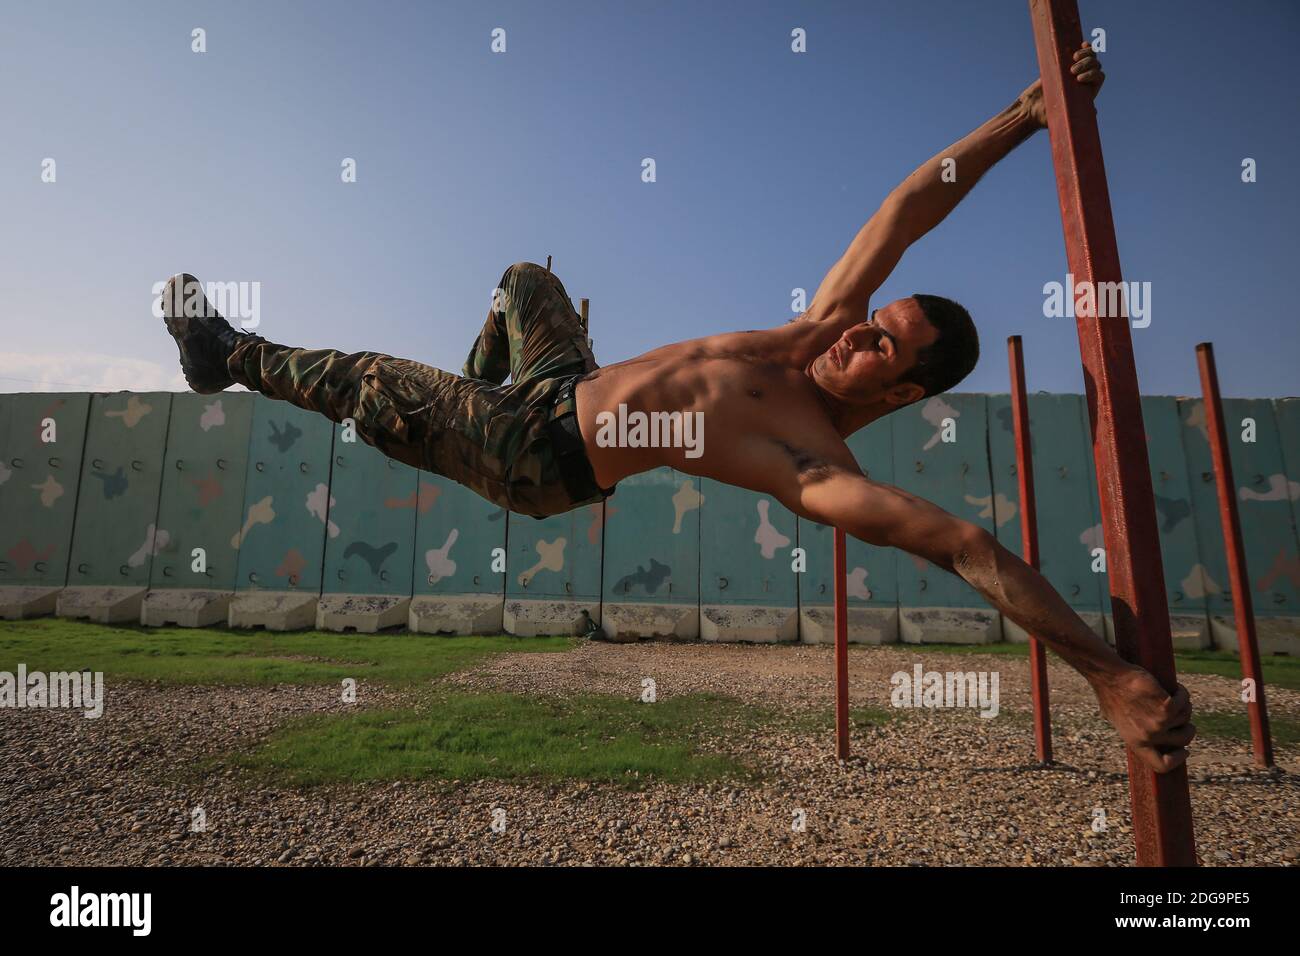 Baghdad, Iraq. 08th Dec, 2020. A soldier shows his skills during a military training by the Iraqi Emergency Response Brigade (ERB) of the Ministry of Interior's Special Operations Forces at a training ground in Baghdad Air base, ahead of the Victory Day that celebrates the defeat of the Islamic State in Iraq. The ERB has played a leading role with the Iraqi military and Kurdish Peshmerga in the battle against the Islamic State (ISIS) in Iraq. Credit: Ameer Al Mohammedaw/dpa/Alamy Live News Stock Photo